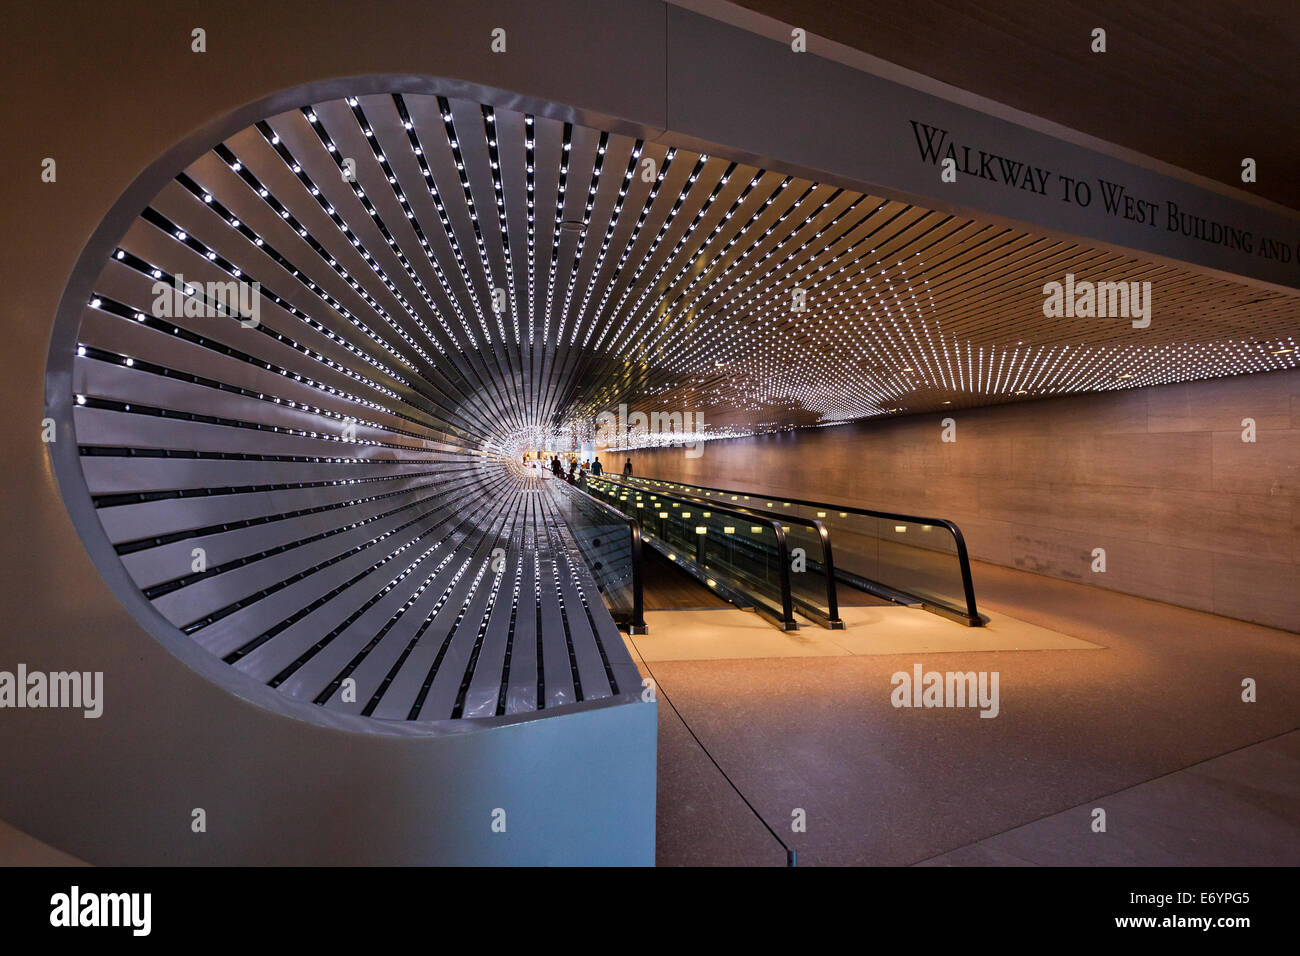 'Multiverse' by Leo Villareal, moving walkway in The Smithsonian National Gallery of Art building - Washington, DC USA Stock Photo